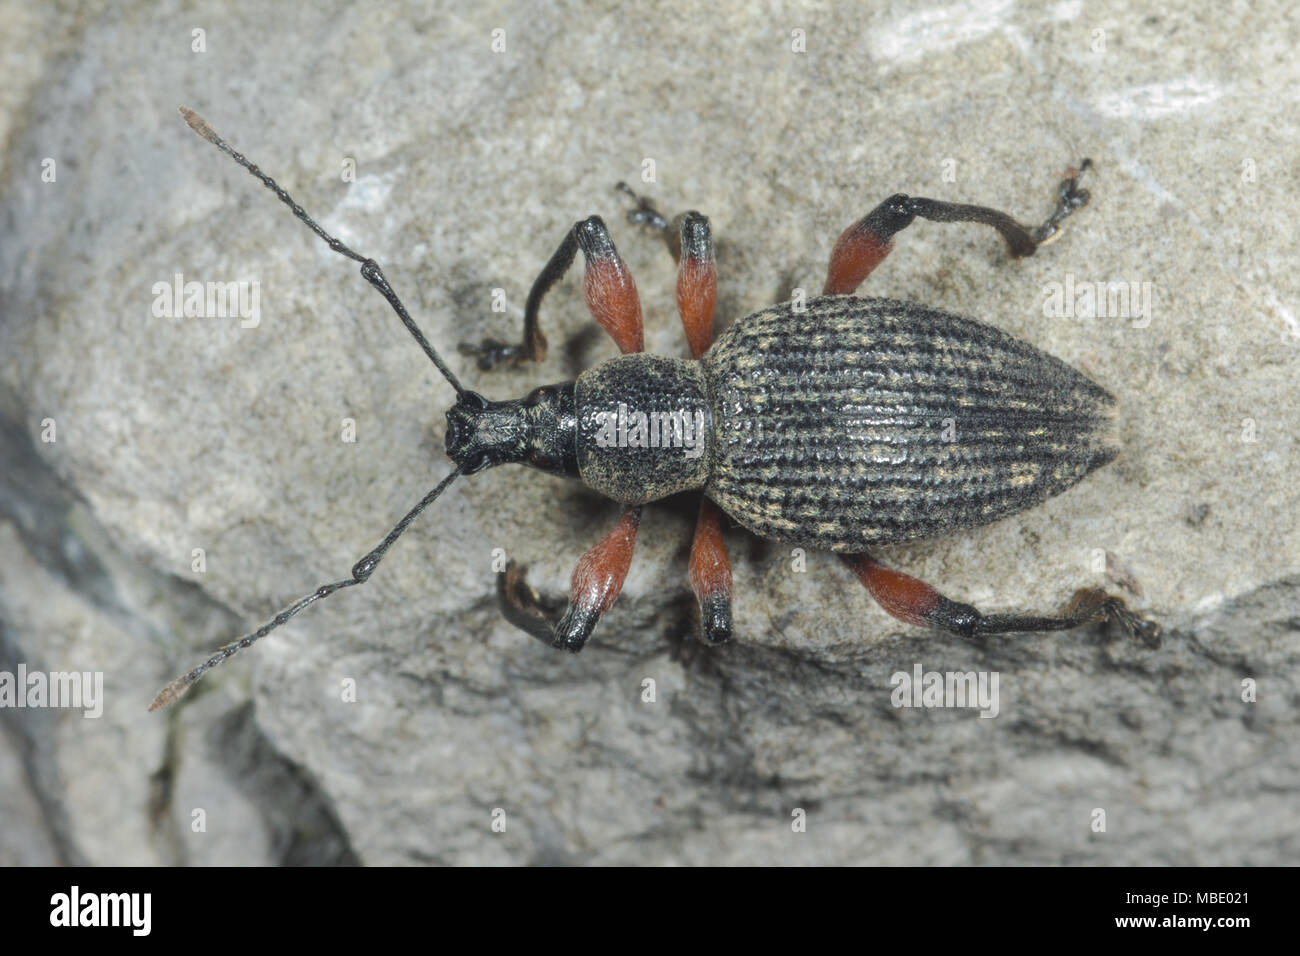 A black and orange weevil (Curculionoidea) on a rock in Italy Stock Photo